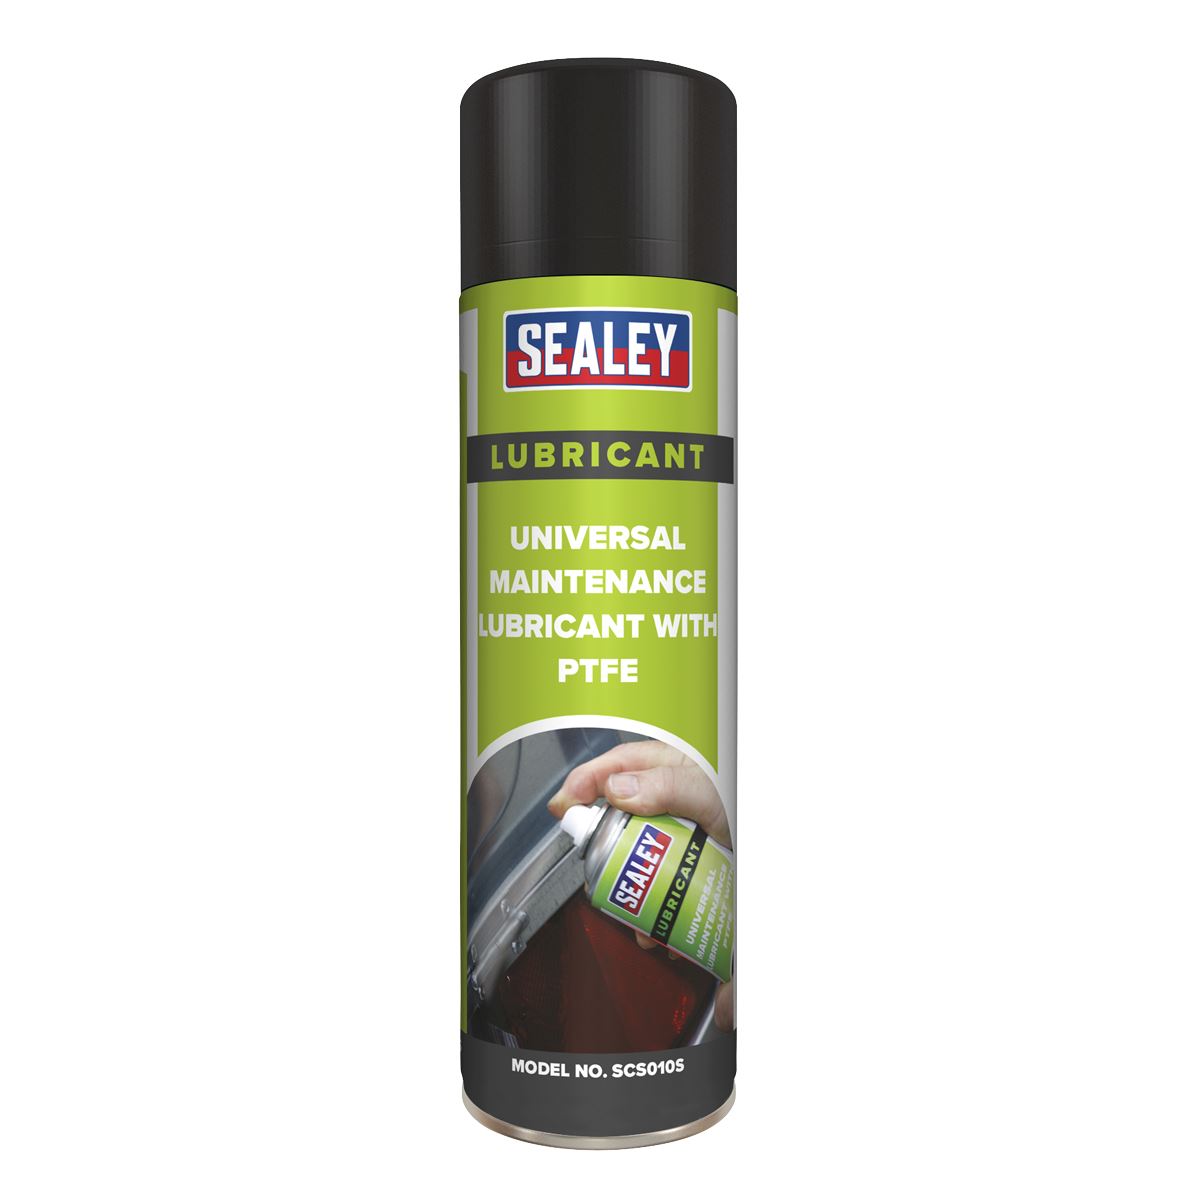 Sealey Universal Maintenance Lubricant with PTFE 500ml